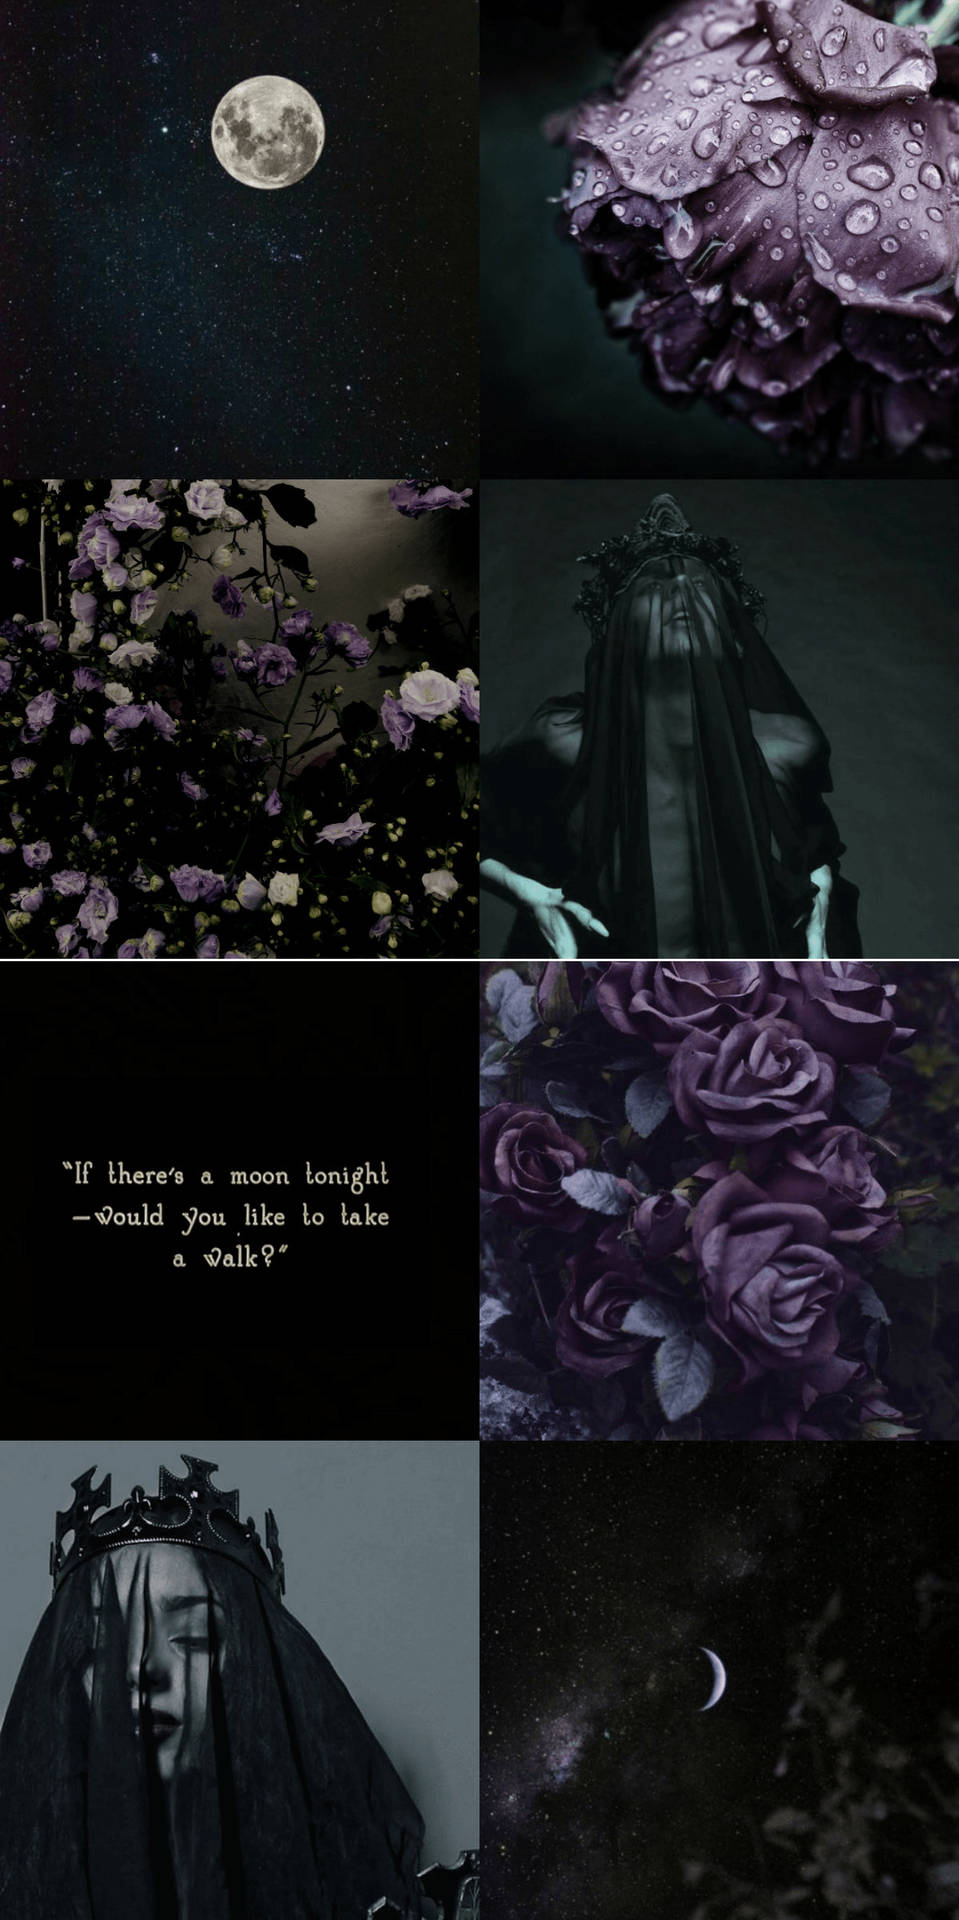 Free Witchy Aesthetic Wallpaper Downloads, Witchy Aesthetic Wallpaper for FREE